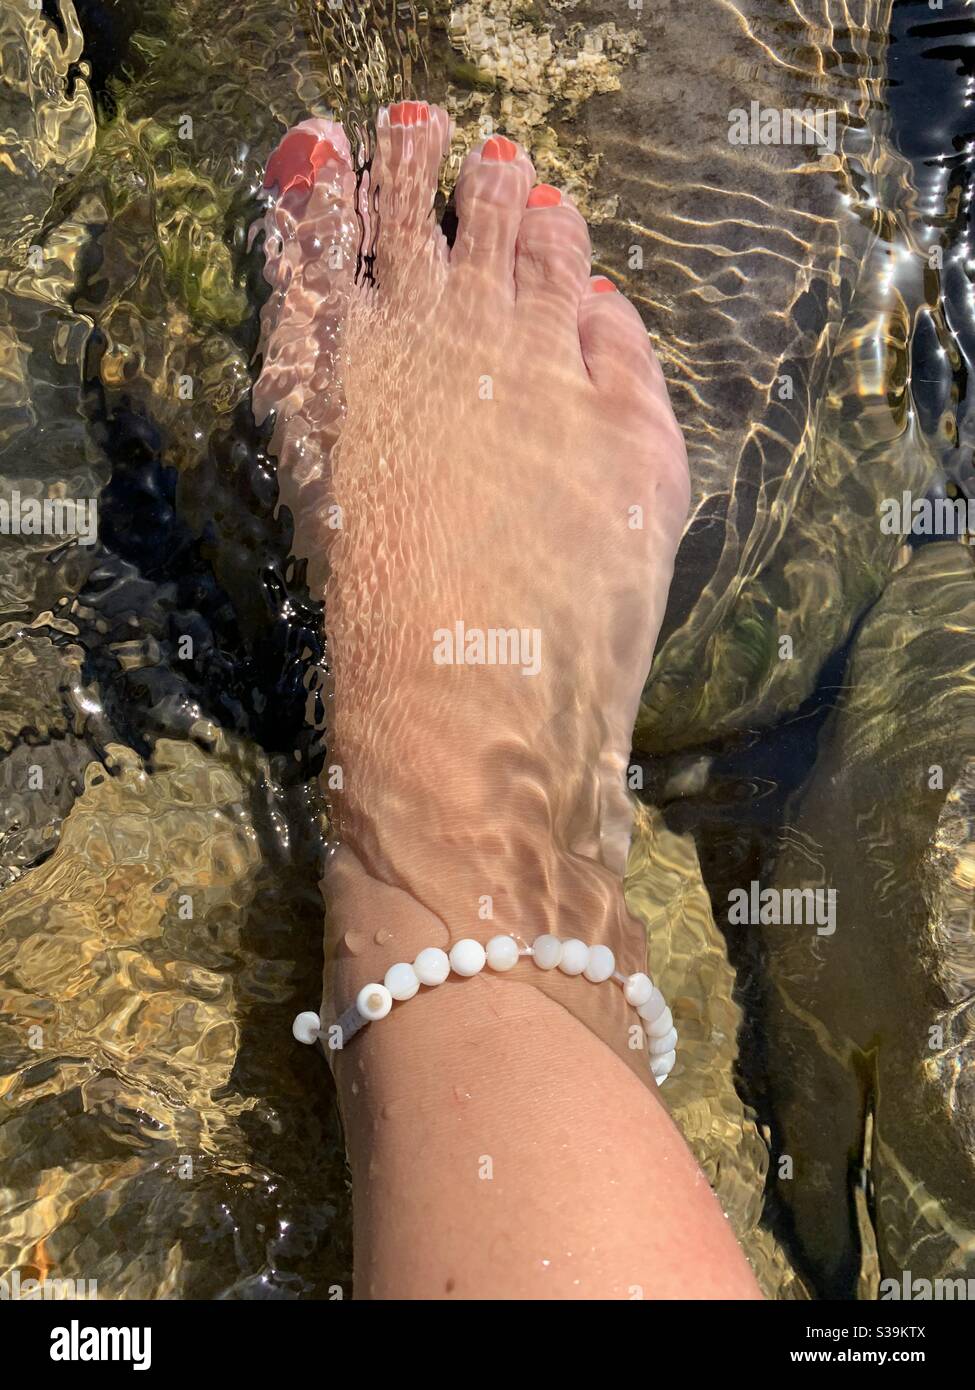 https://c8.alamy.com/comp/S39KTX/foot-in-river-water-with-pearly-anklet-S39KTX.jpg